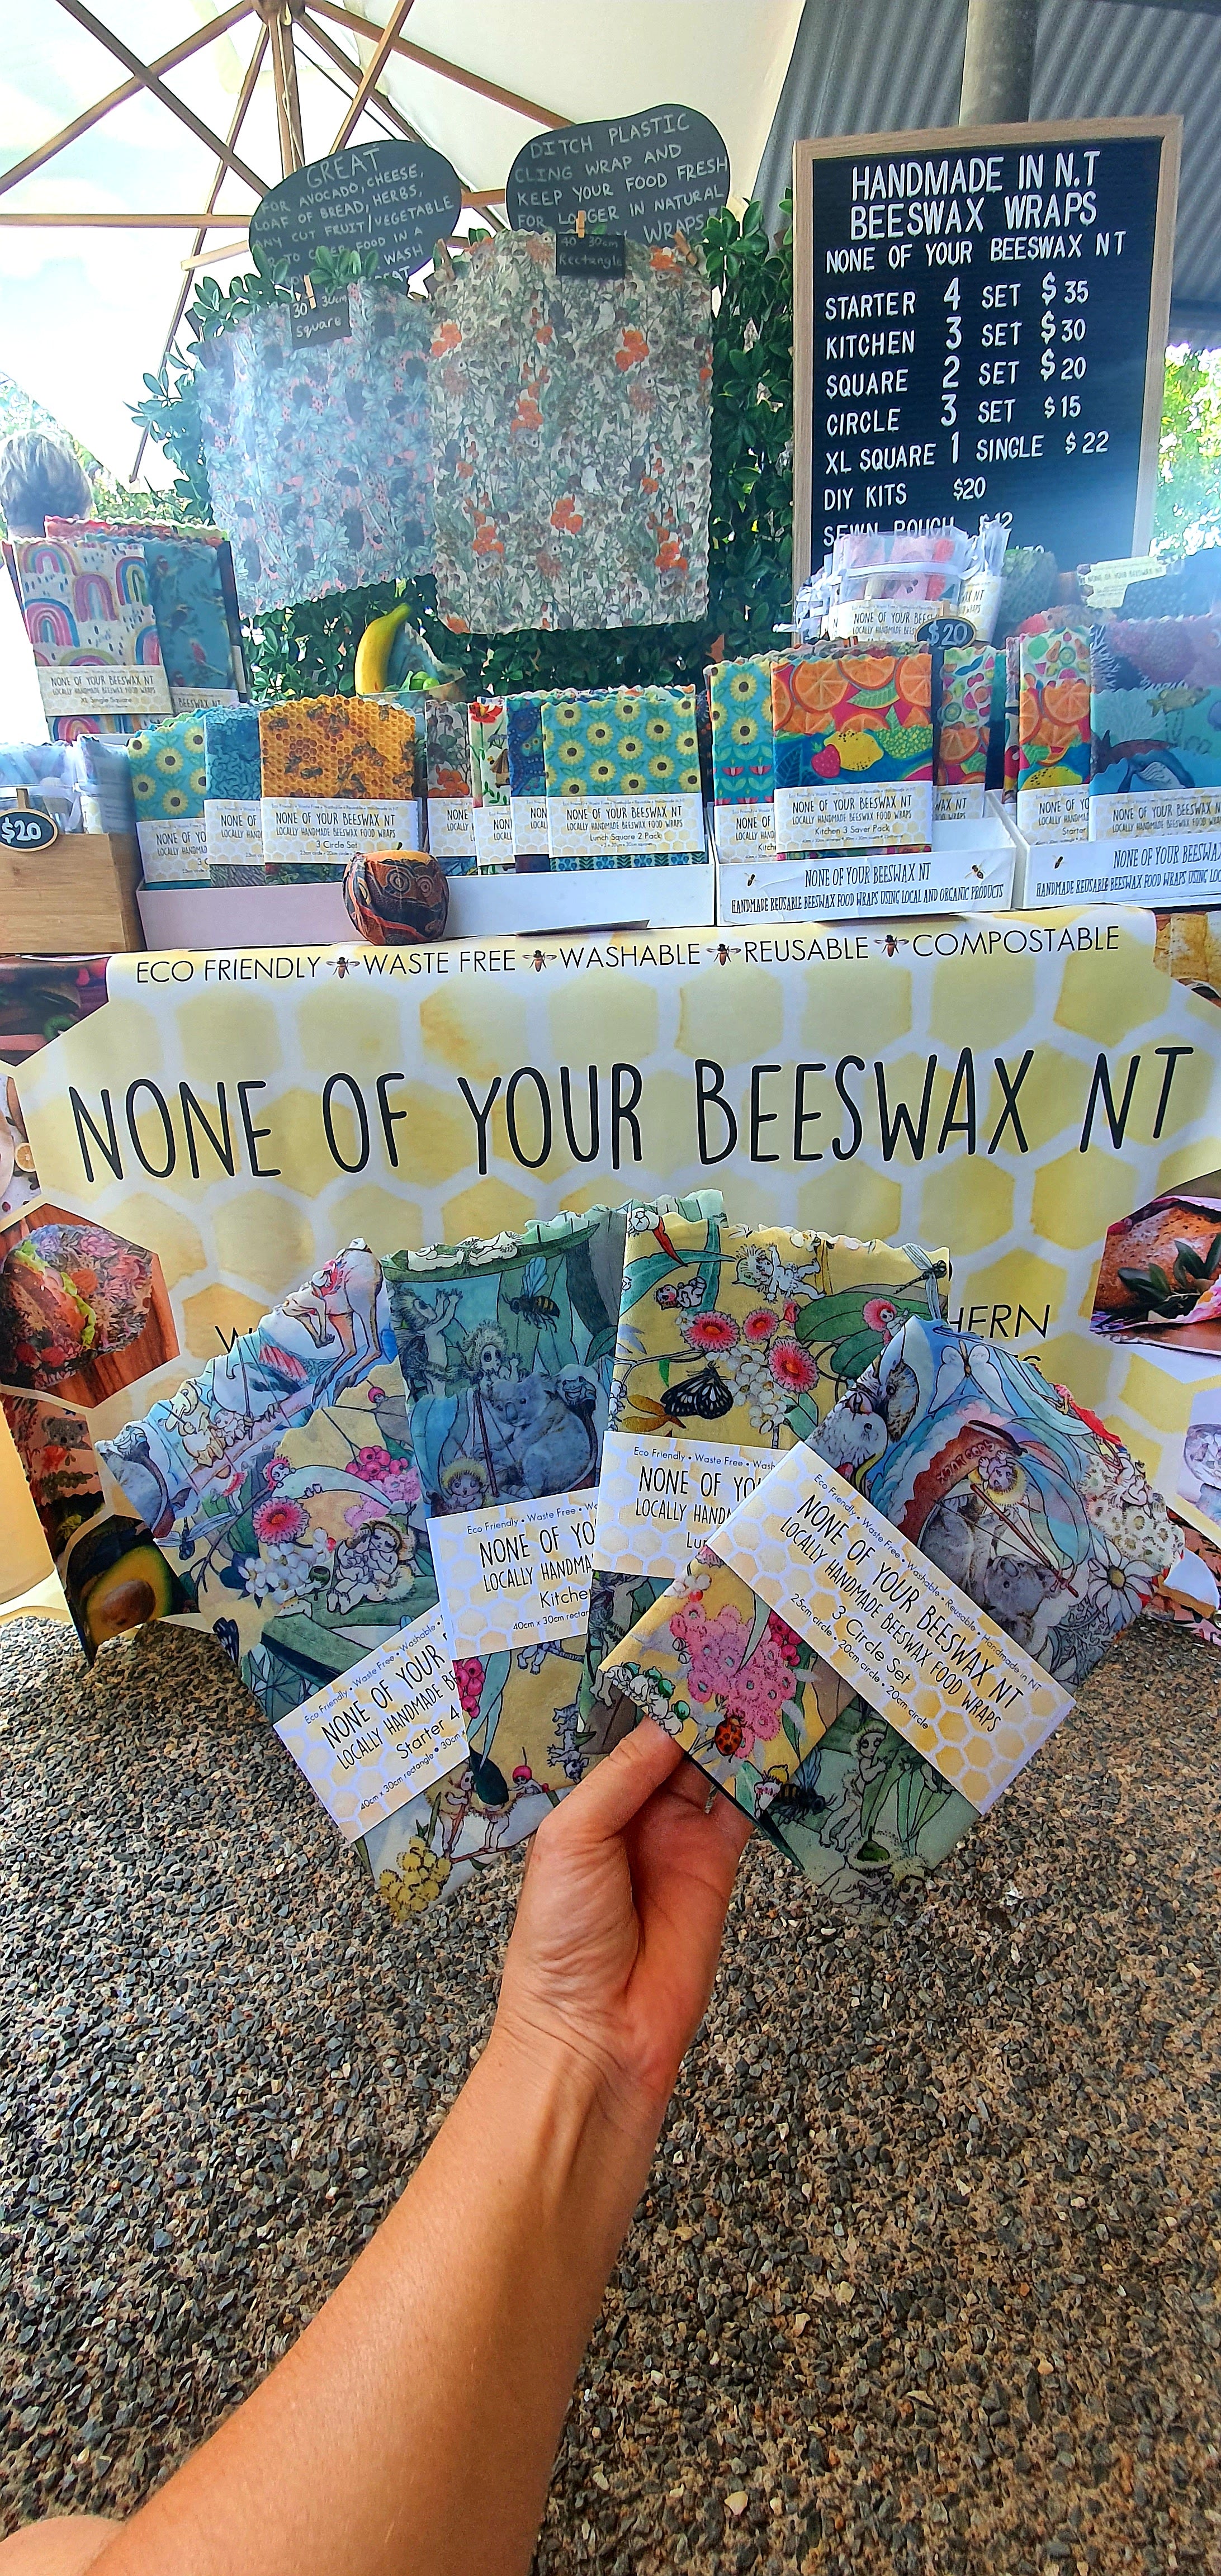 None of Your Beeswax NT